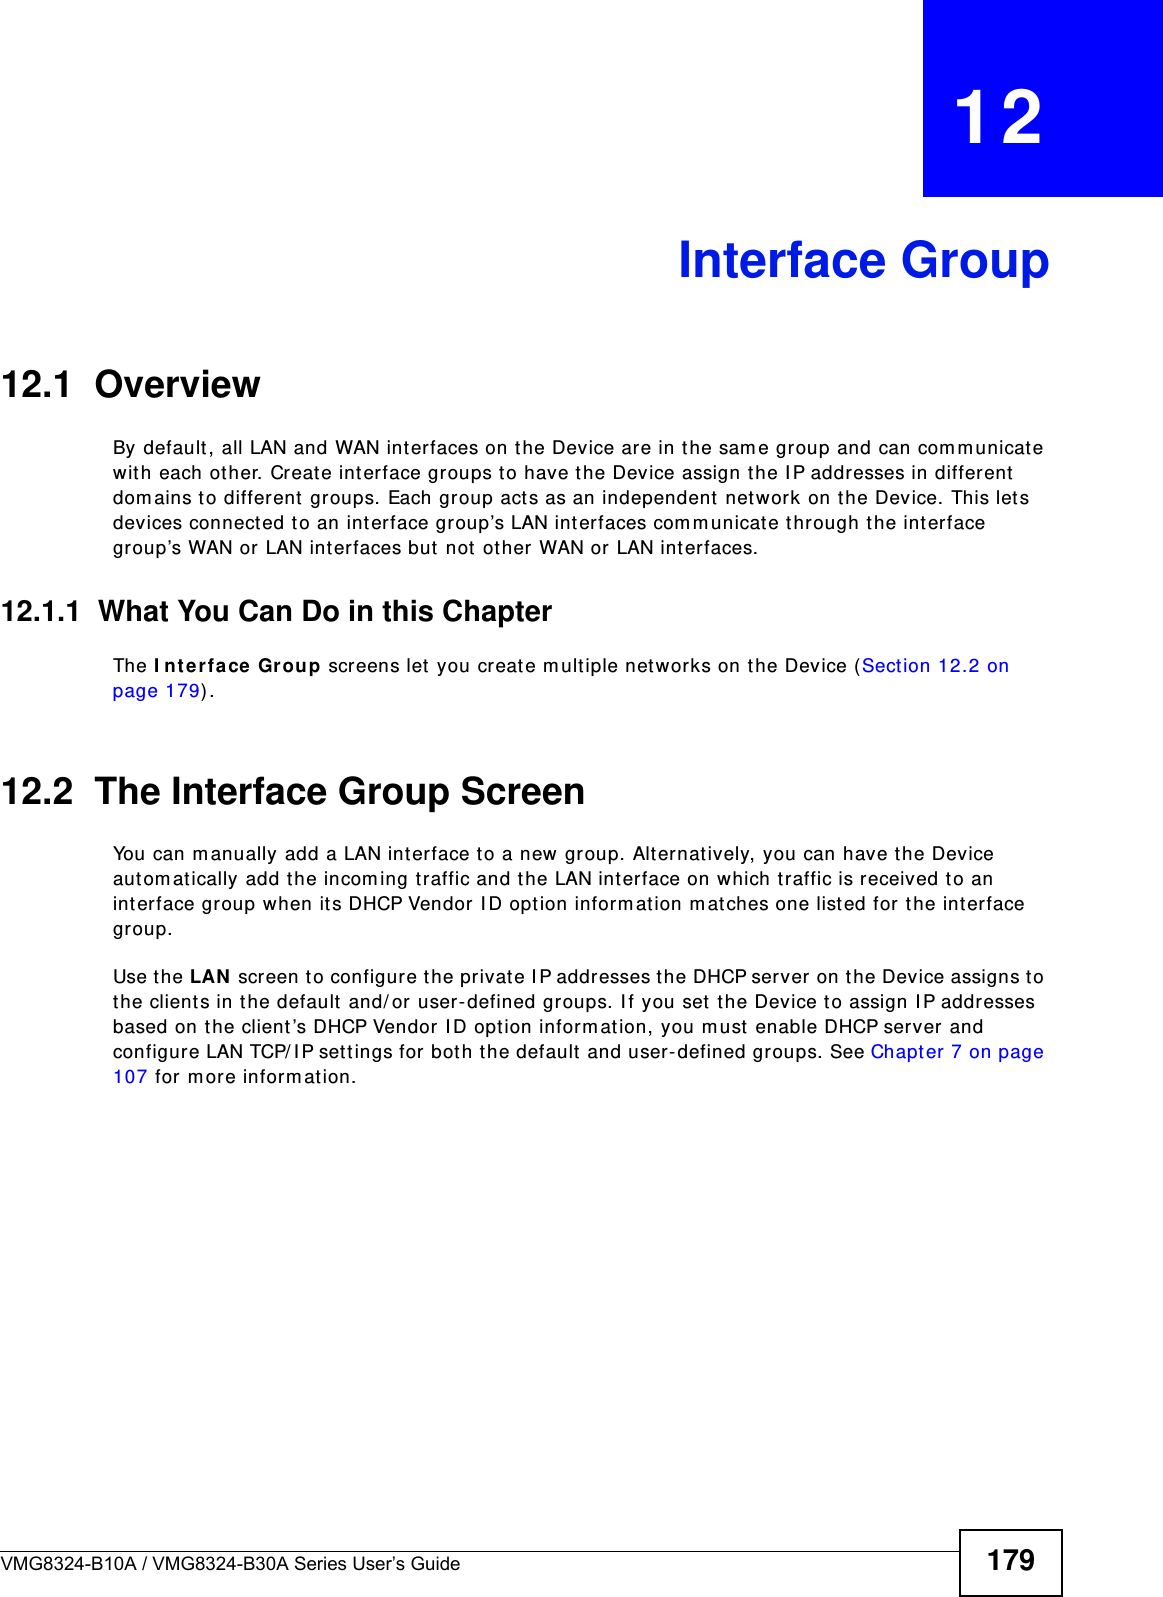 VMG8324-B10A / VMG8324-B30A Series User’s Guide 179CHAPTER   12Interface Group12.1  OverviewBy default , all LAN and WAN interfaces on the Device are in the sam e group and can com m unicat e wit h each other. Creat e int erface groups to have t he Device assign t he I P addresses in different  dom ains t o different groups. Each group act s as an independent  net work on the Device. This lets devices connect ed to an int erface group’s LAN int erfaces com m unicate t hrough the int erface group’s WAN or LAN interfaces but  not  other WAN or LAN int erfaces.12.1.1  What You Can Do in this ChapterThe I nt e rface Group screens let  you cr eate m ultiple networks on t he Device (Sect ion 12.2 on page 179) .12.2  The Interface Group ScreenYou can m anually add a LAN interface t o a new group. Alternatively, you can have t he Device aut om atically add t he incom ing t raffic and t he LAN int erface on which t raffic is received to an int erface group when it s DHCP Vendor  I D option inform at ion m at ches one listed for the int erface group. Use t he LAN  screen t o configure t he private I P addresses t he DHCP server on t he Device assigns to the clients in the default  and/ or user- defined groups. I f you set  t he Device t o assign I P addresses based on the client ’s DHCP Vendor I D opt ion inform ation, you m ust  enable DHCP server and configure LAN TCP/ I P set tings for bot h t he default and user- defined groups. See Chapter 7 on page 107 for m ore inform at ion.